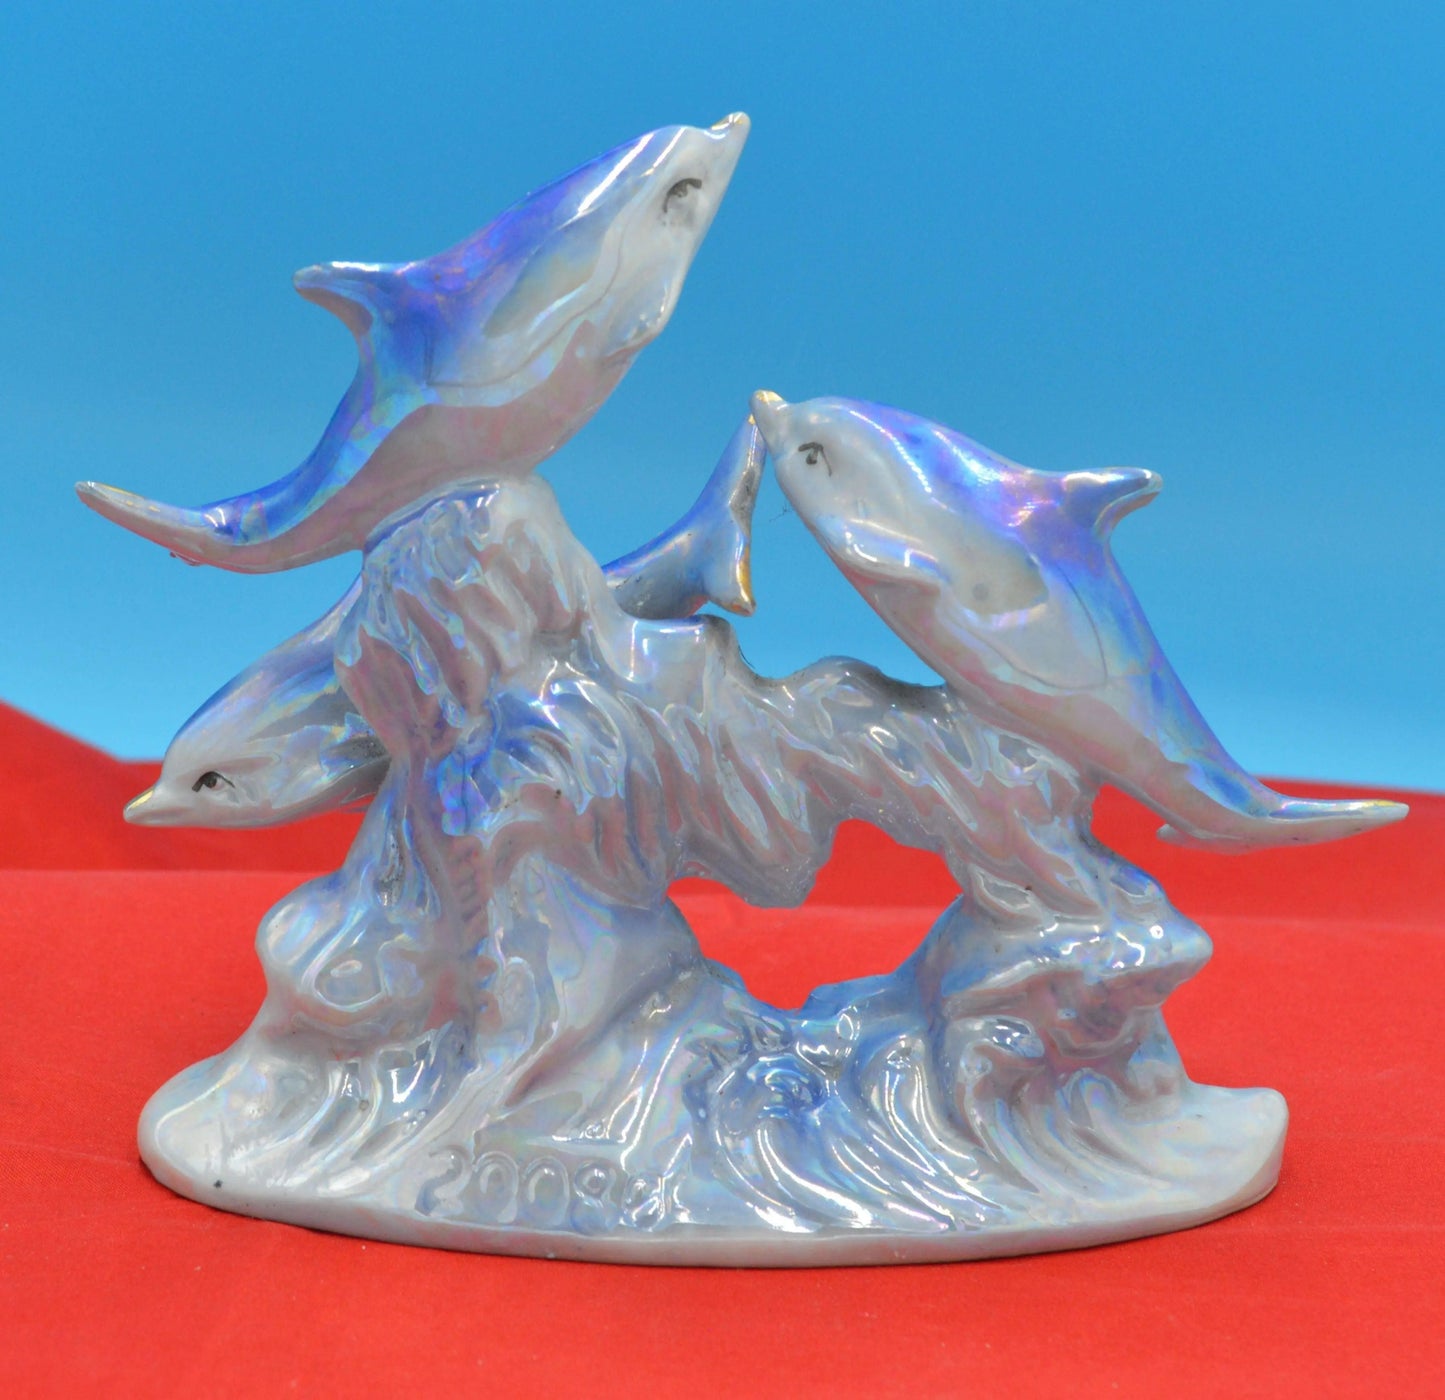 DOLPHIN ORNAMENT THREE IRIDESCENT DOLPHINS - TMD167207